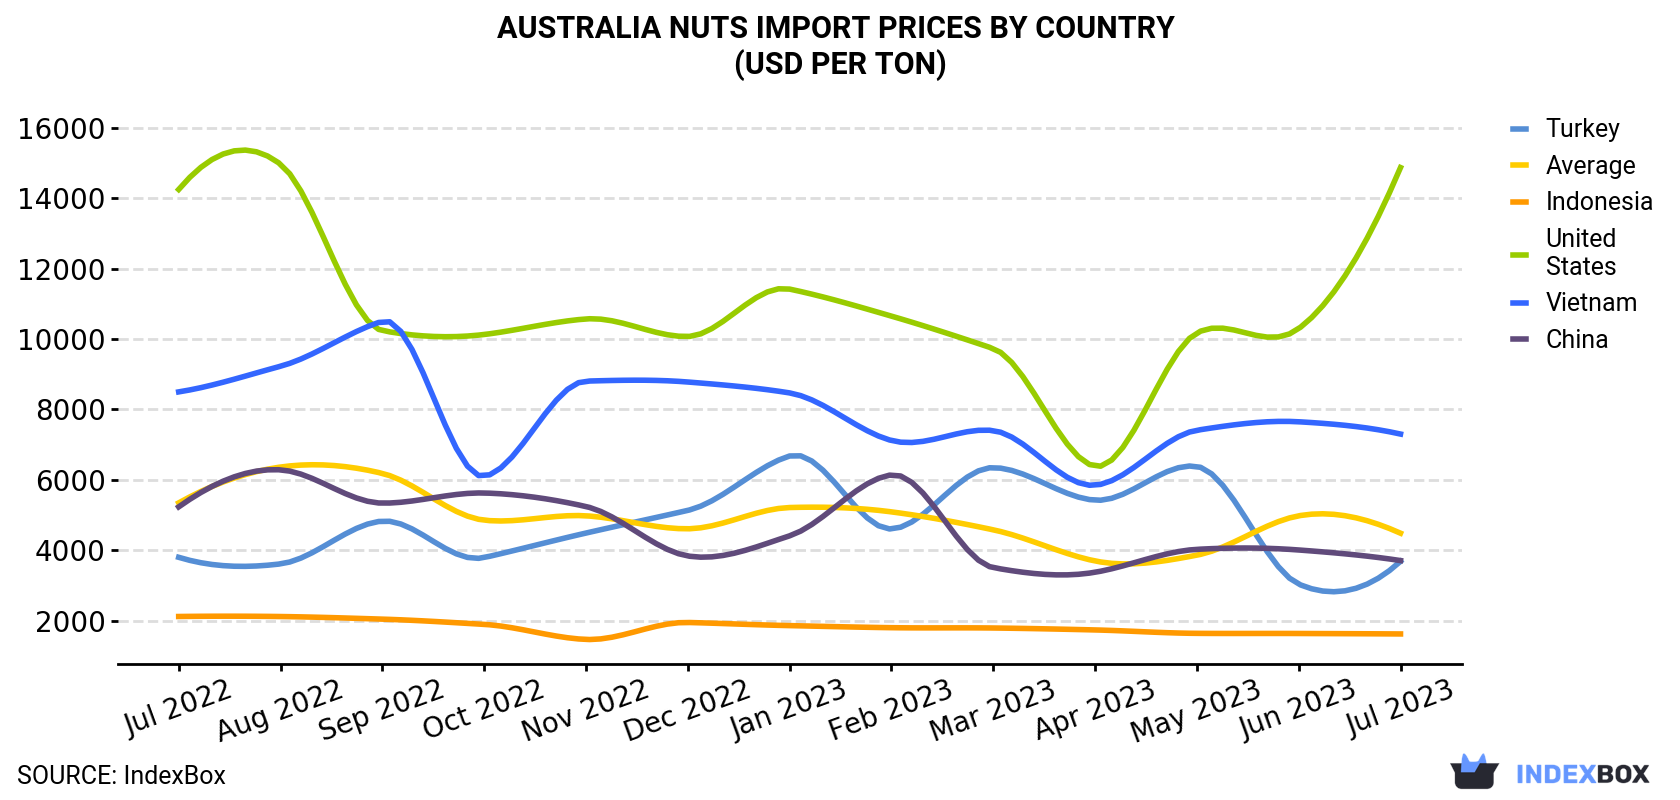 Australia Nuts Import Prices By Country (USD Per Ton)